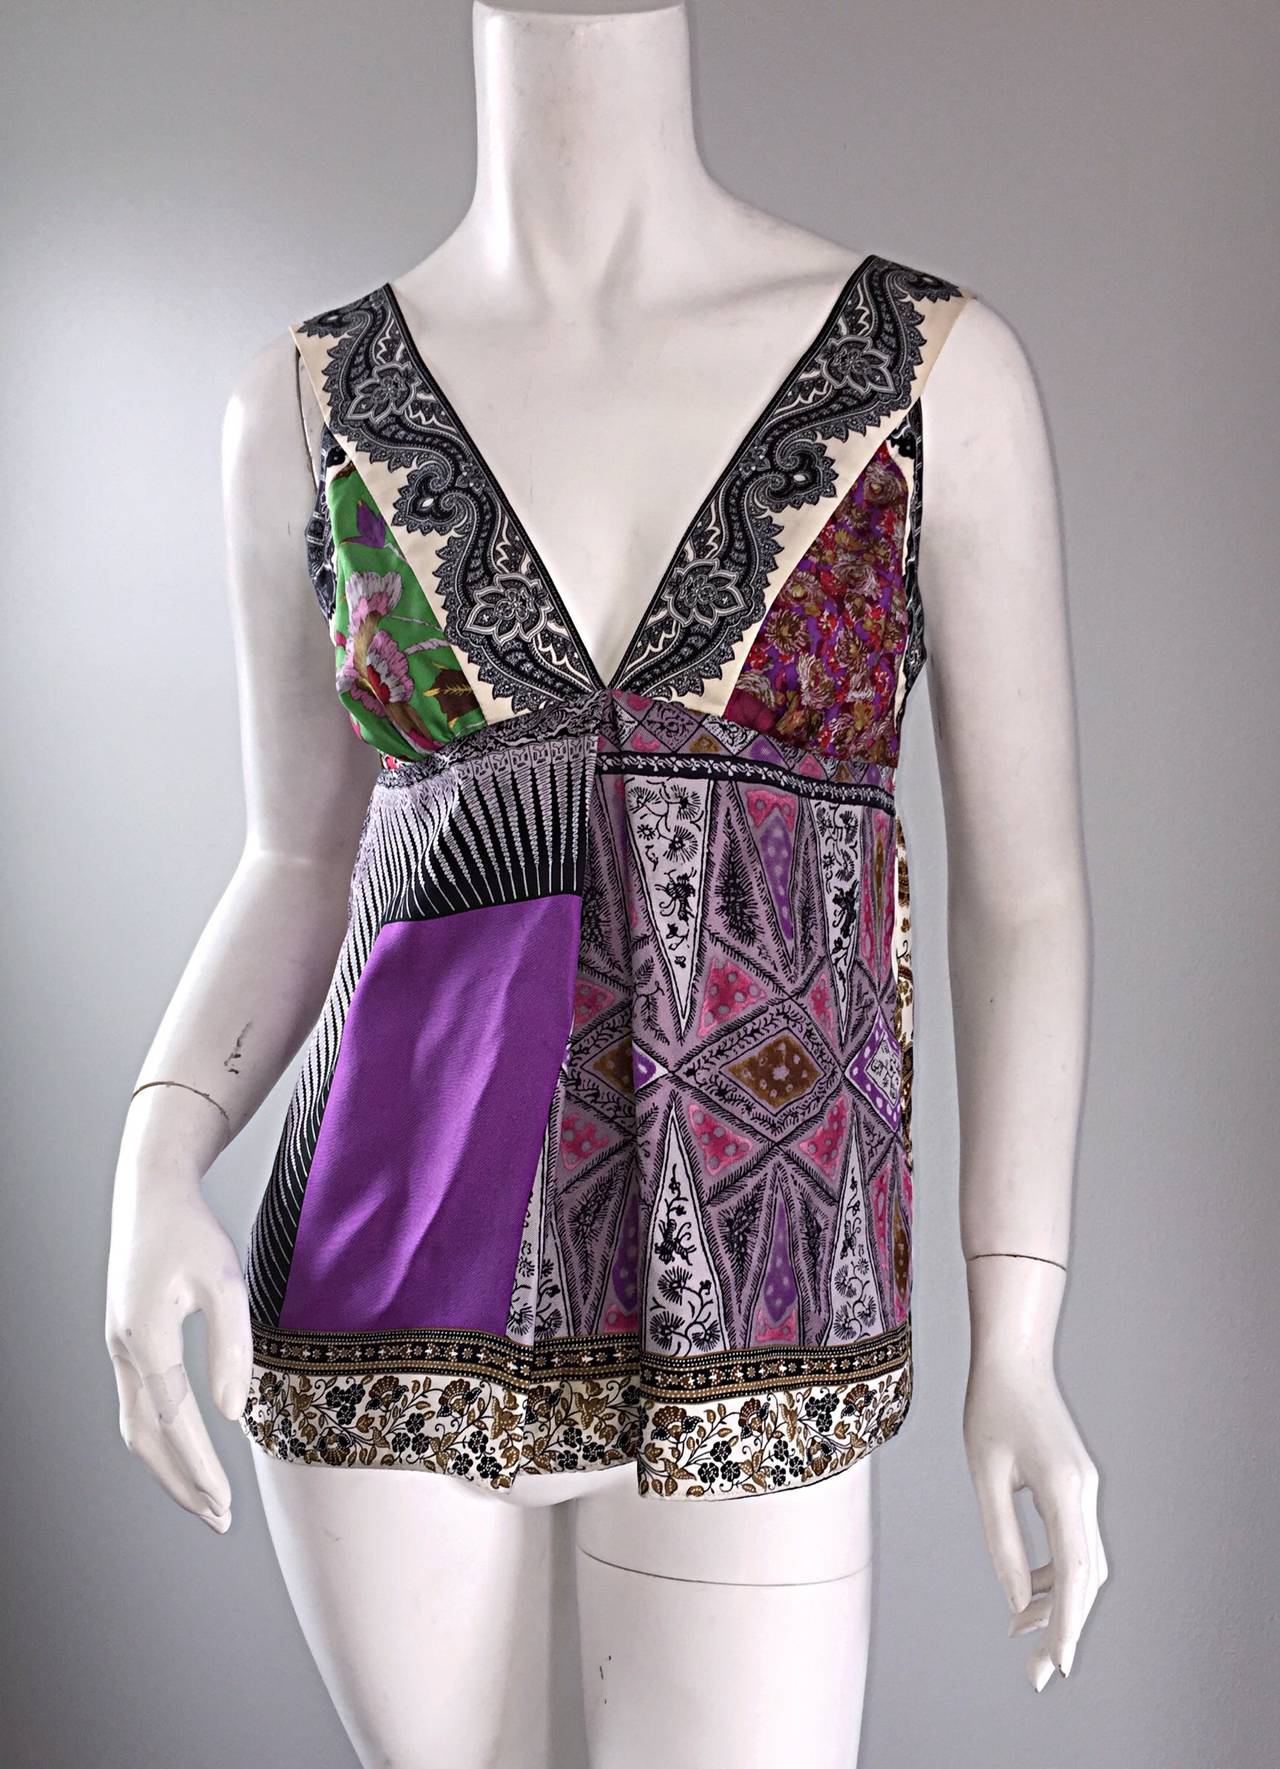 Such a pretty Etro multi-printed silk top! Patchwork prints, with a forgiving babydoll/empire waist. Hidden zipper up the back. Looks great with shorts, denim, or a skirt! Made in Italy. 100% Silk. In great condition. Marked Size Eu 40